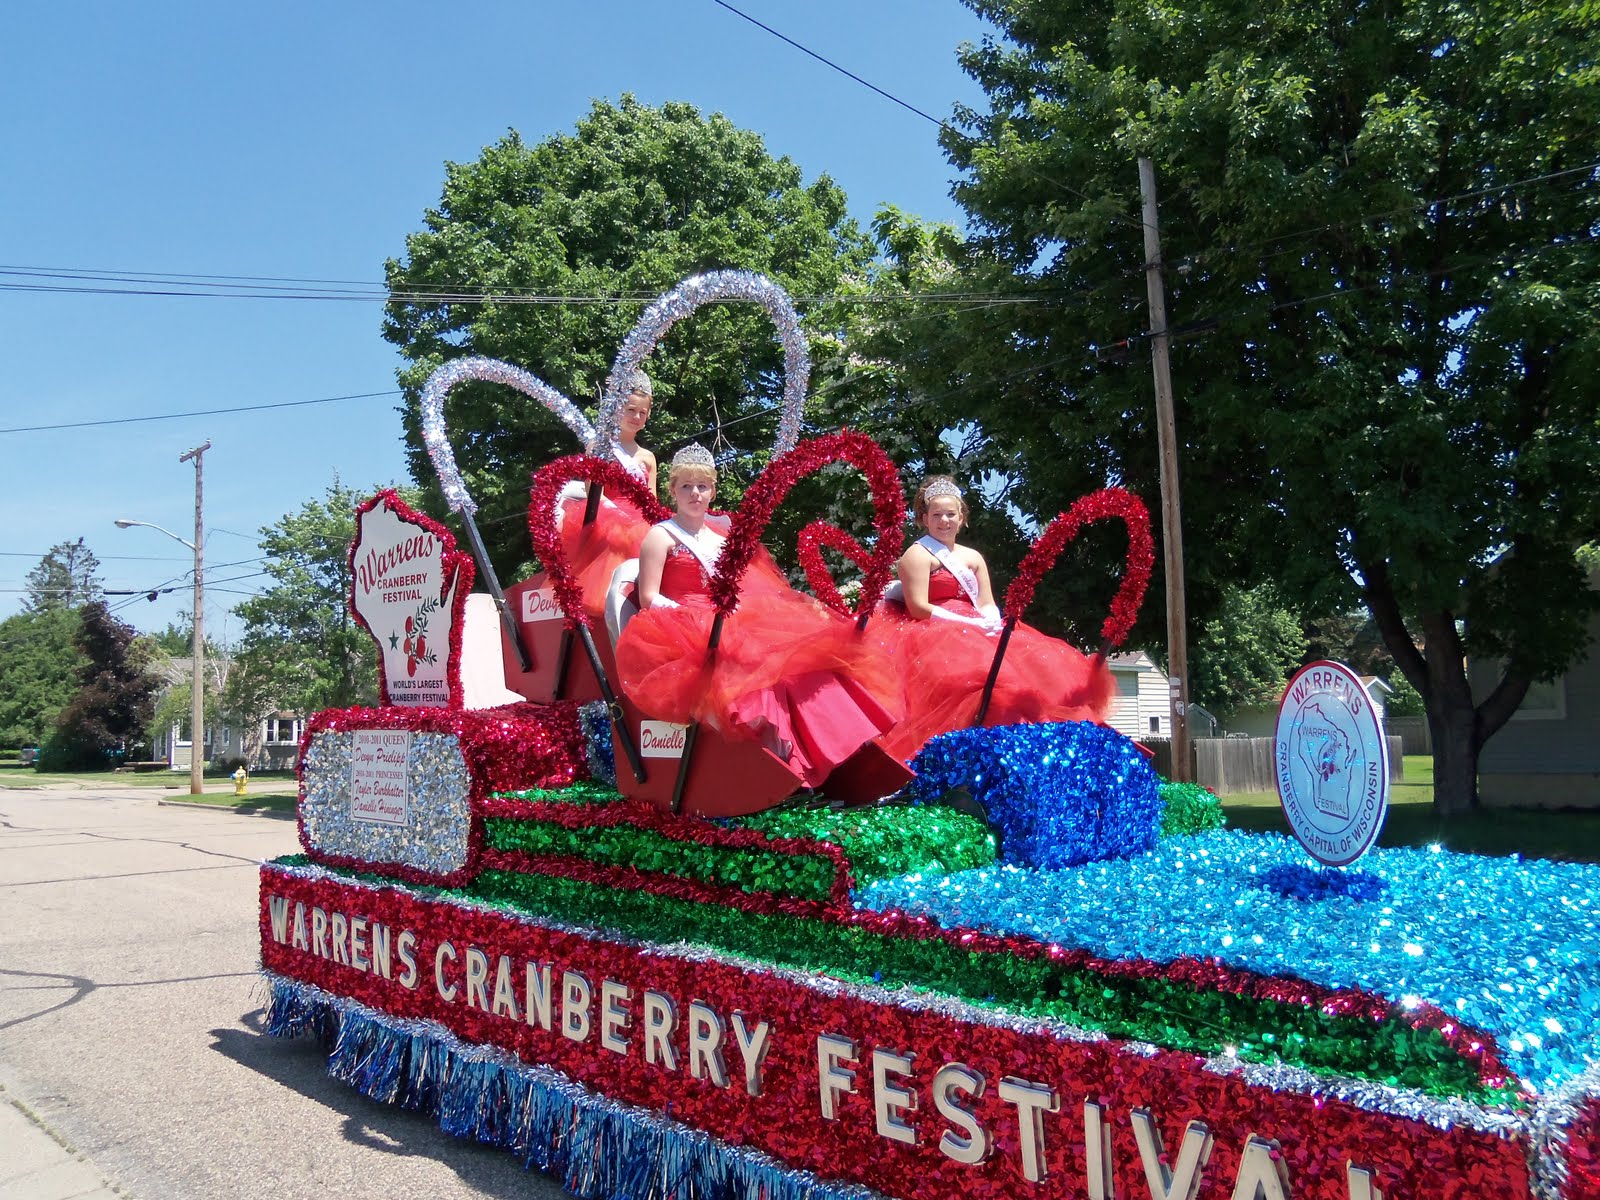 Warrens Cranberry Festival Royalty Cranberry Royalty Greetings for the